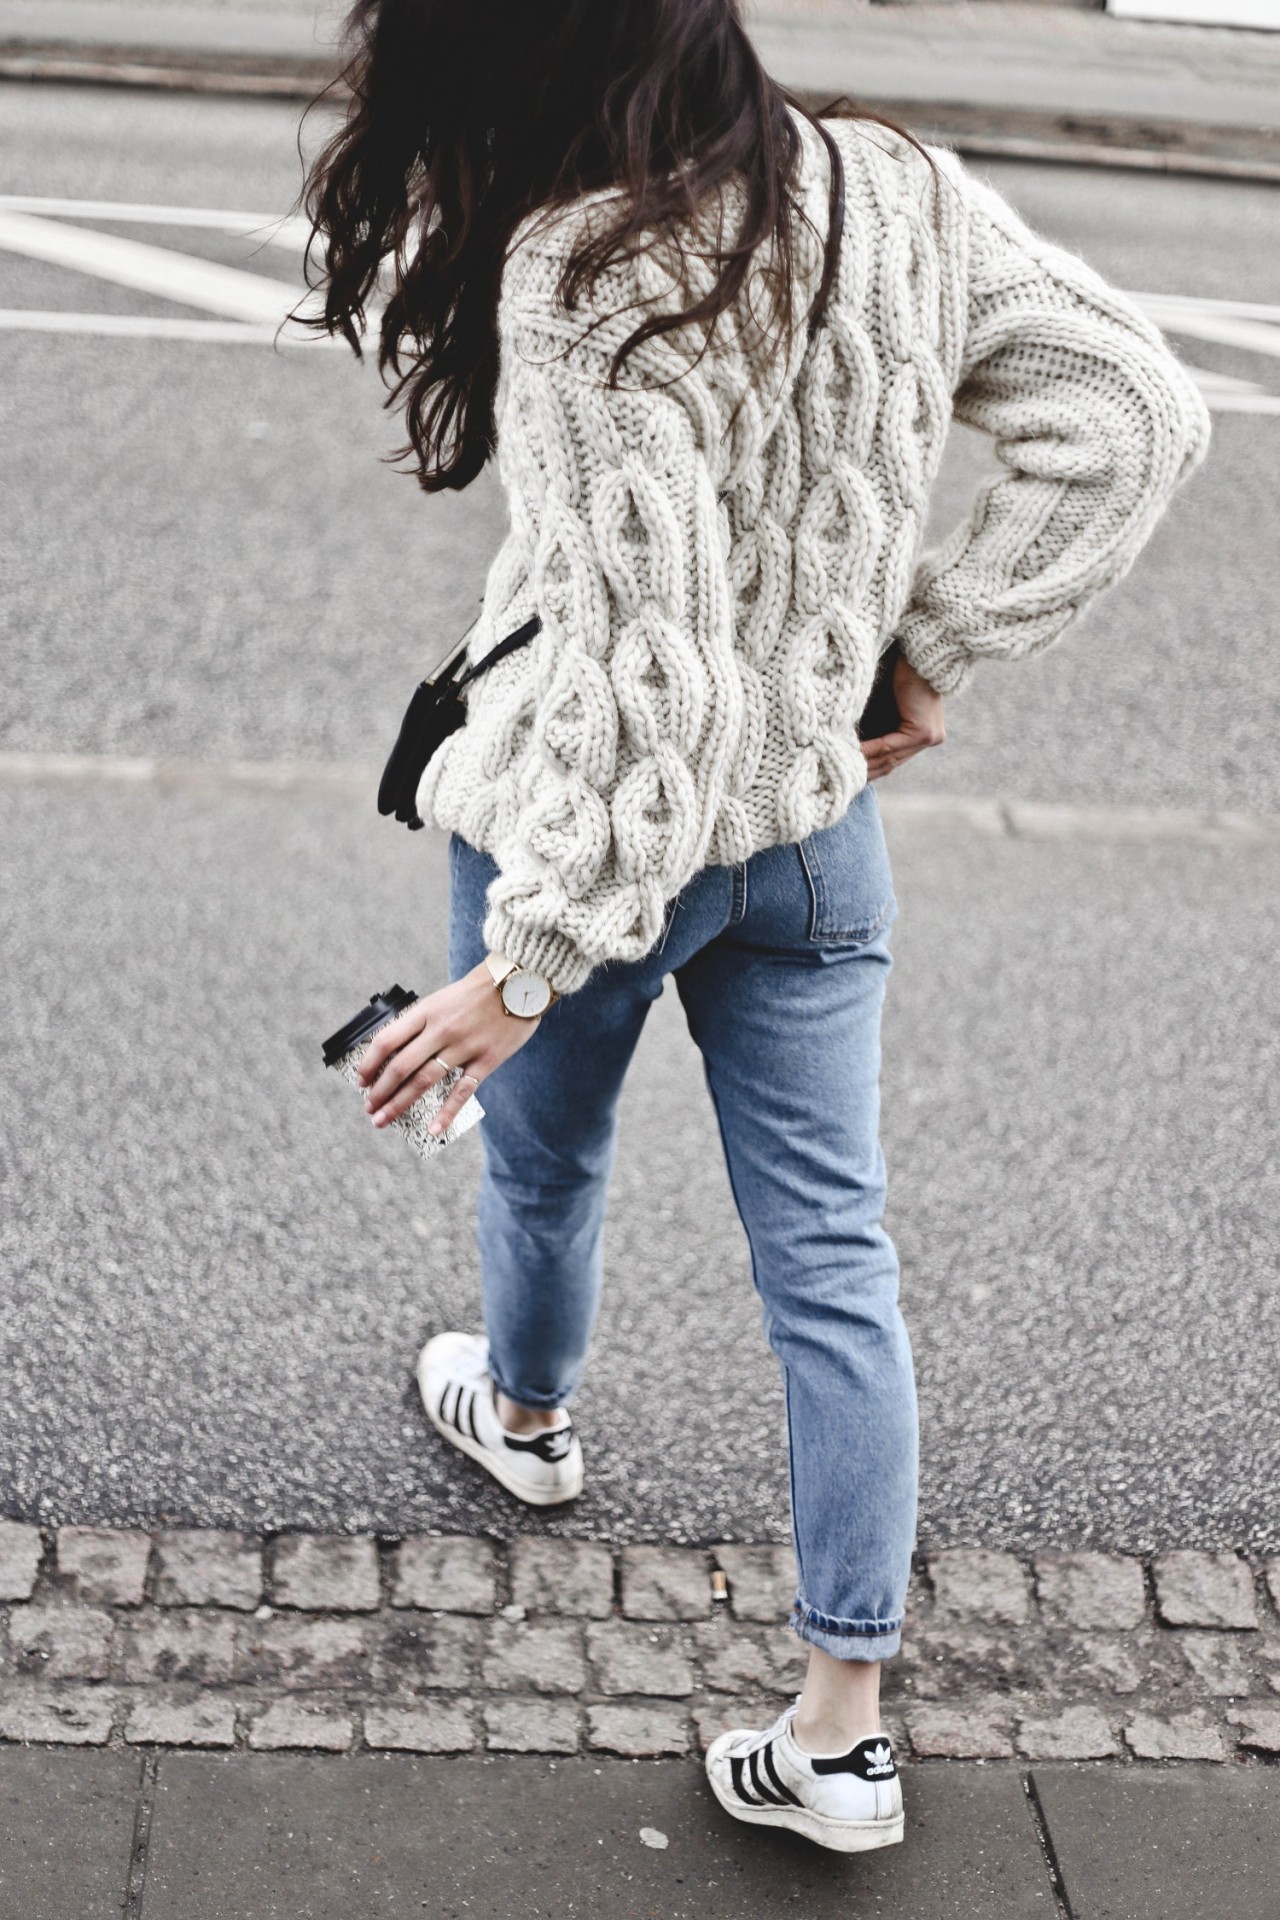 Monja Wormser is working the knitwear trend in this chunky cable knit sweater from Mirstores, which she has paired with simple denim jeans and retro Adidas sneakers. Knit: Mirstores, Jeans: Monki, Sneakers: Adidas, Bag: Celine.